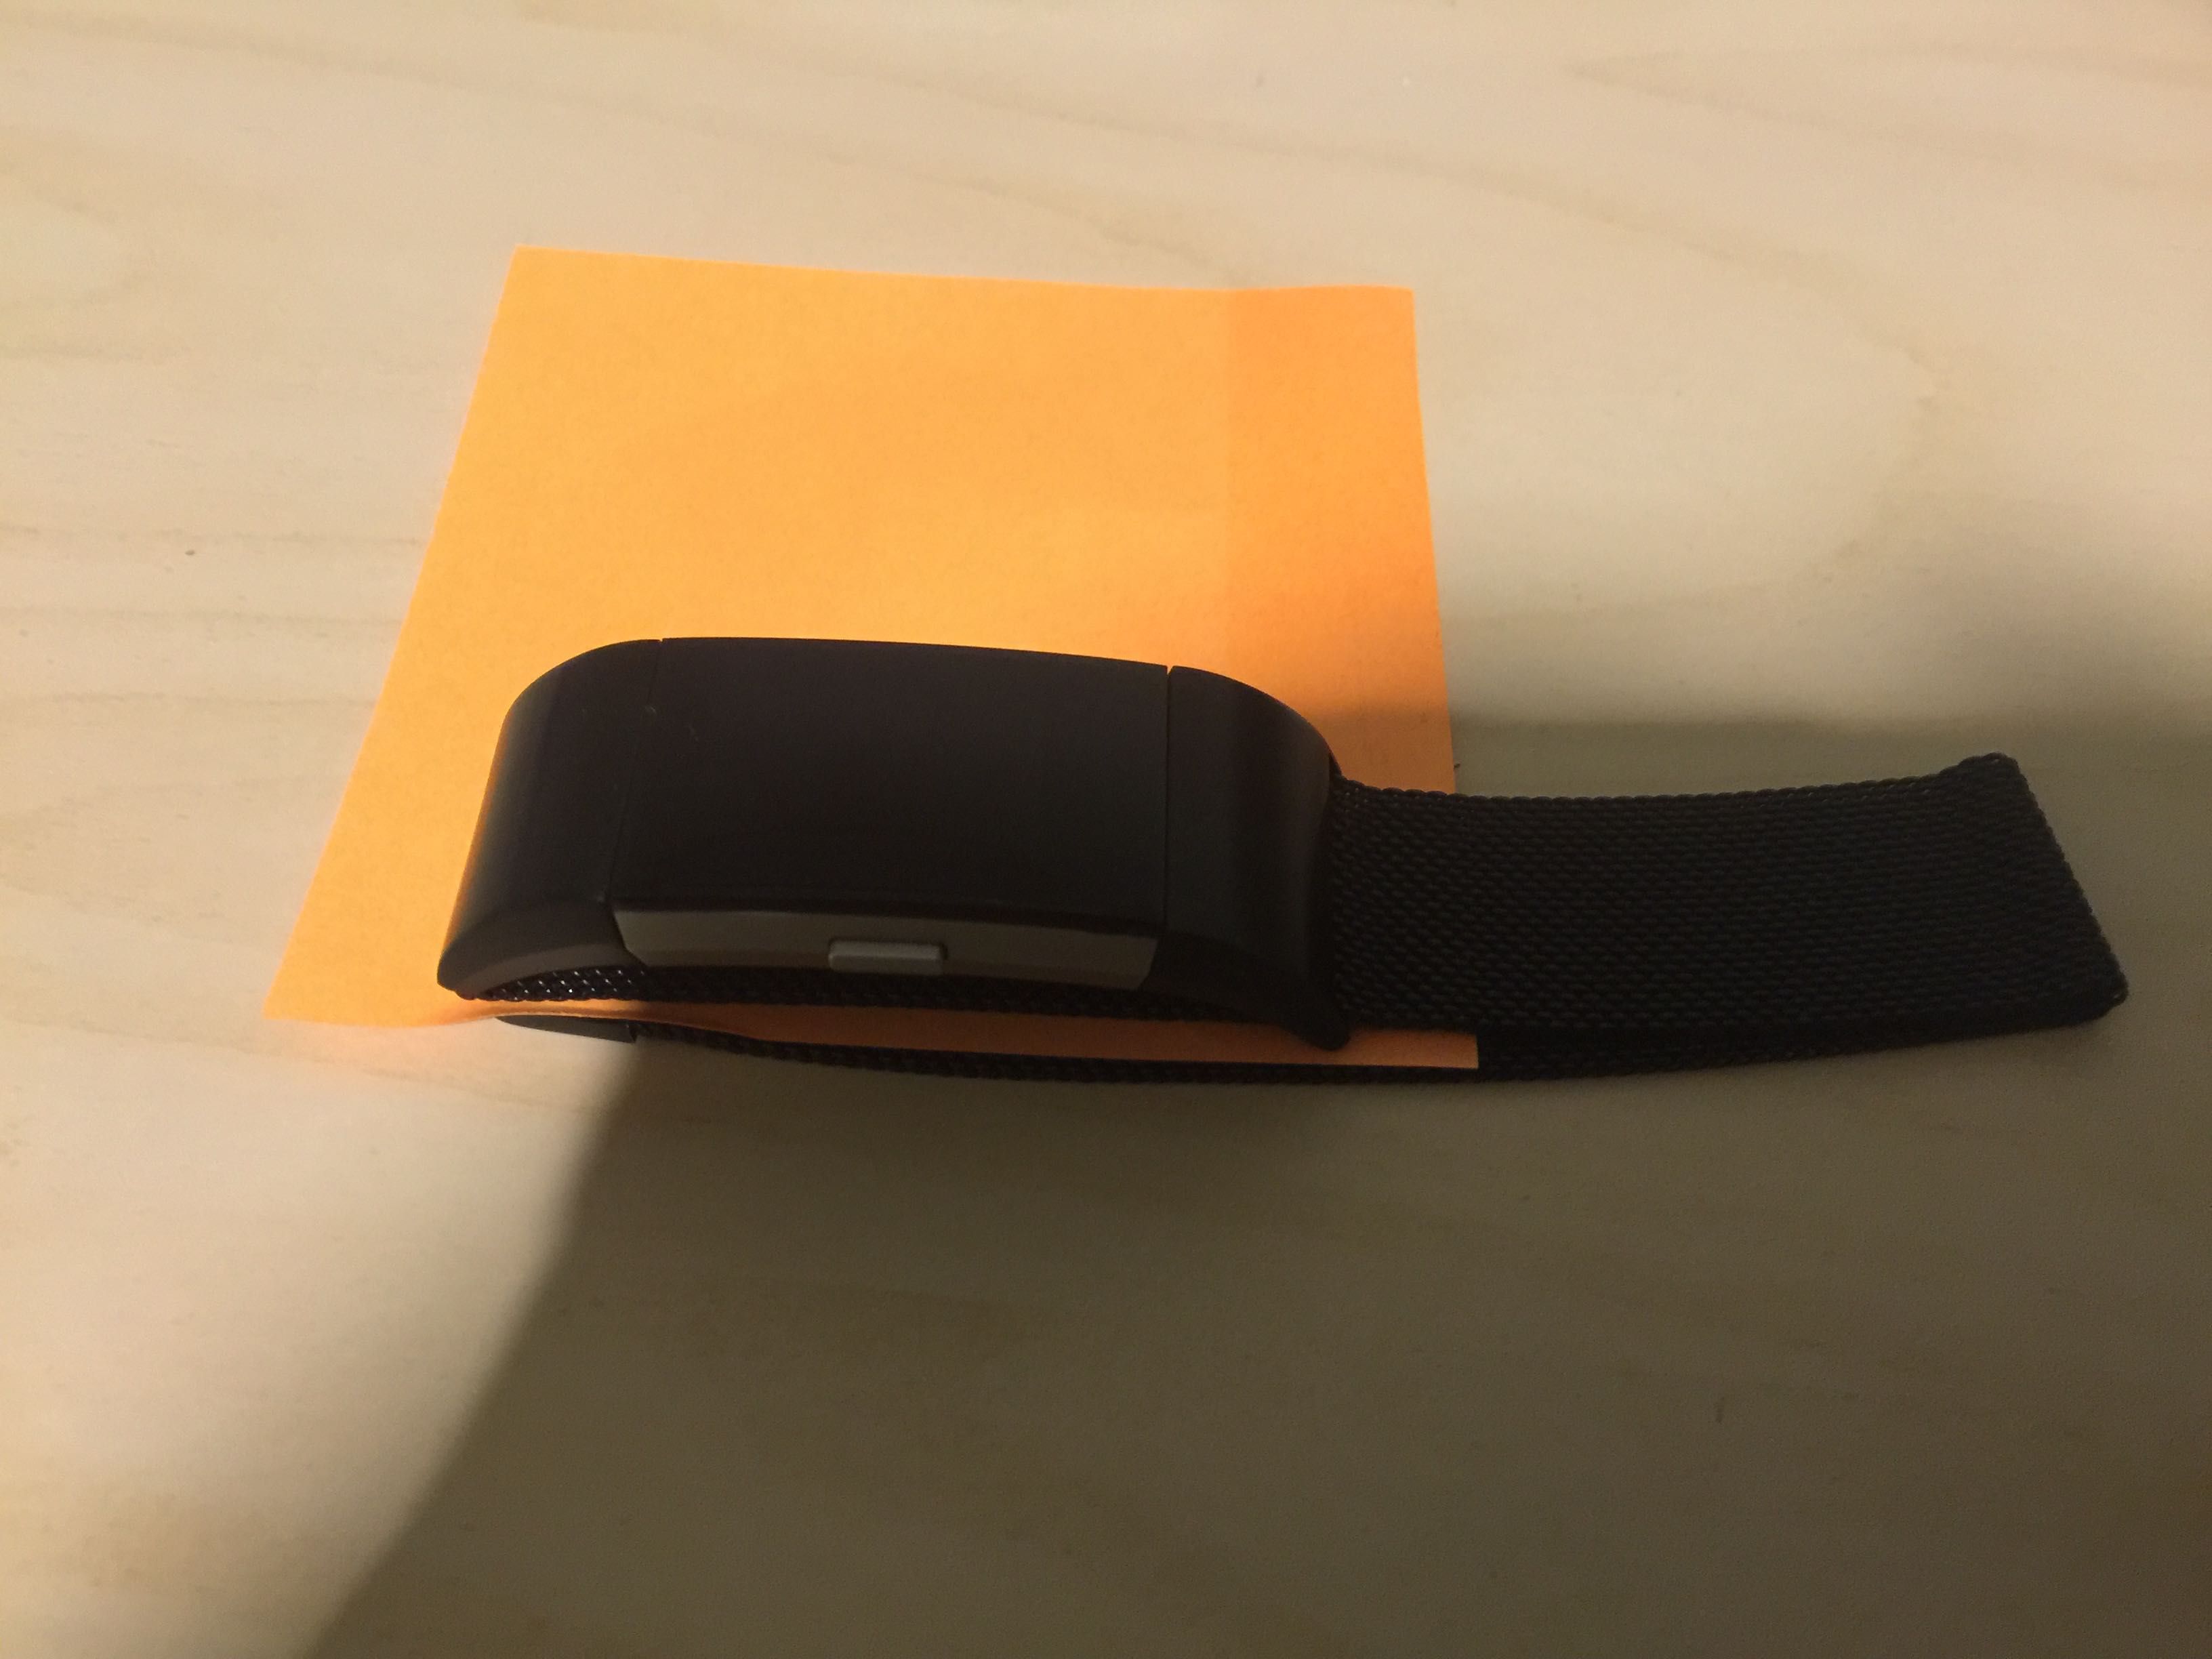 fitbit fob watch holder